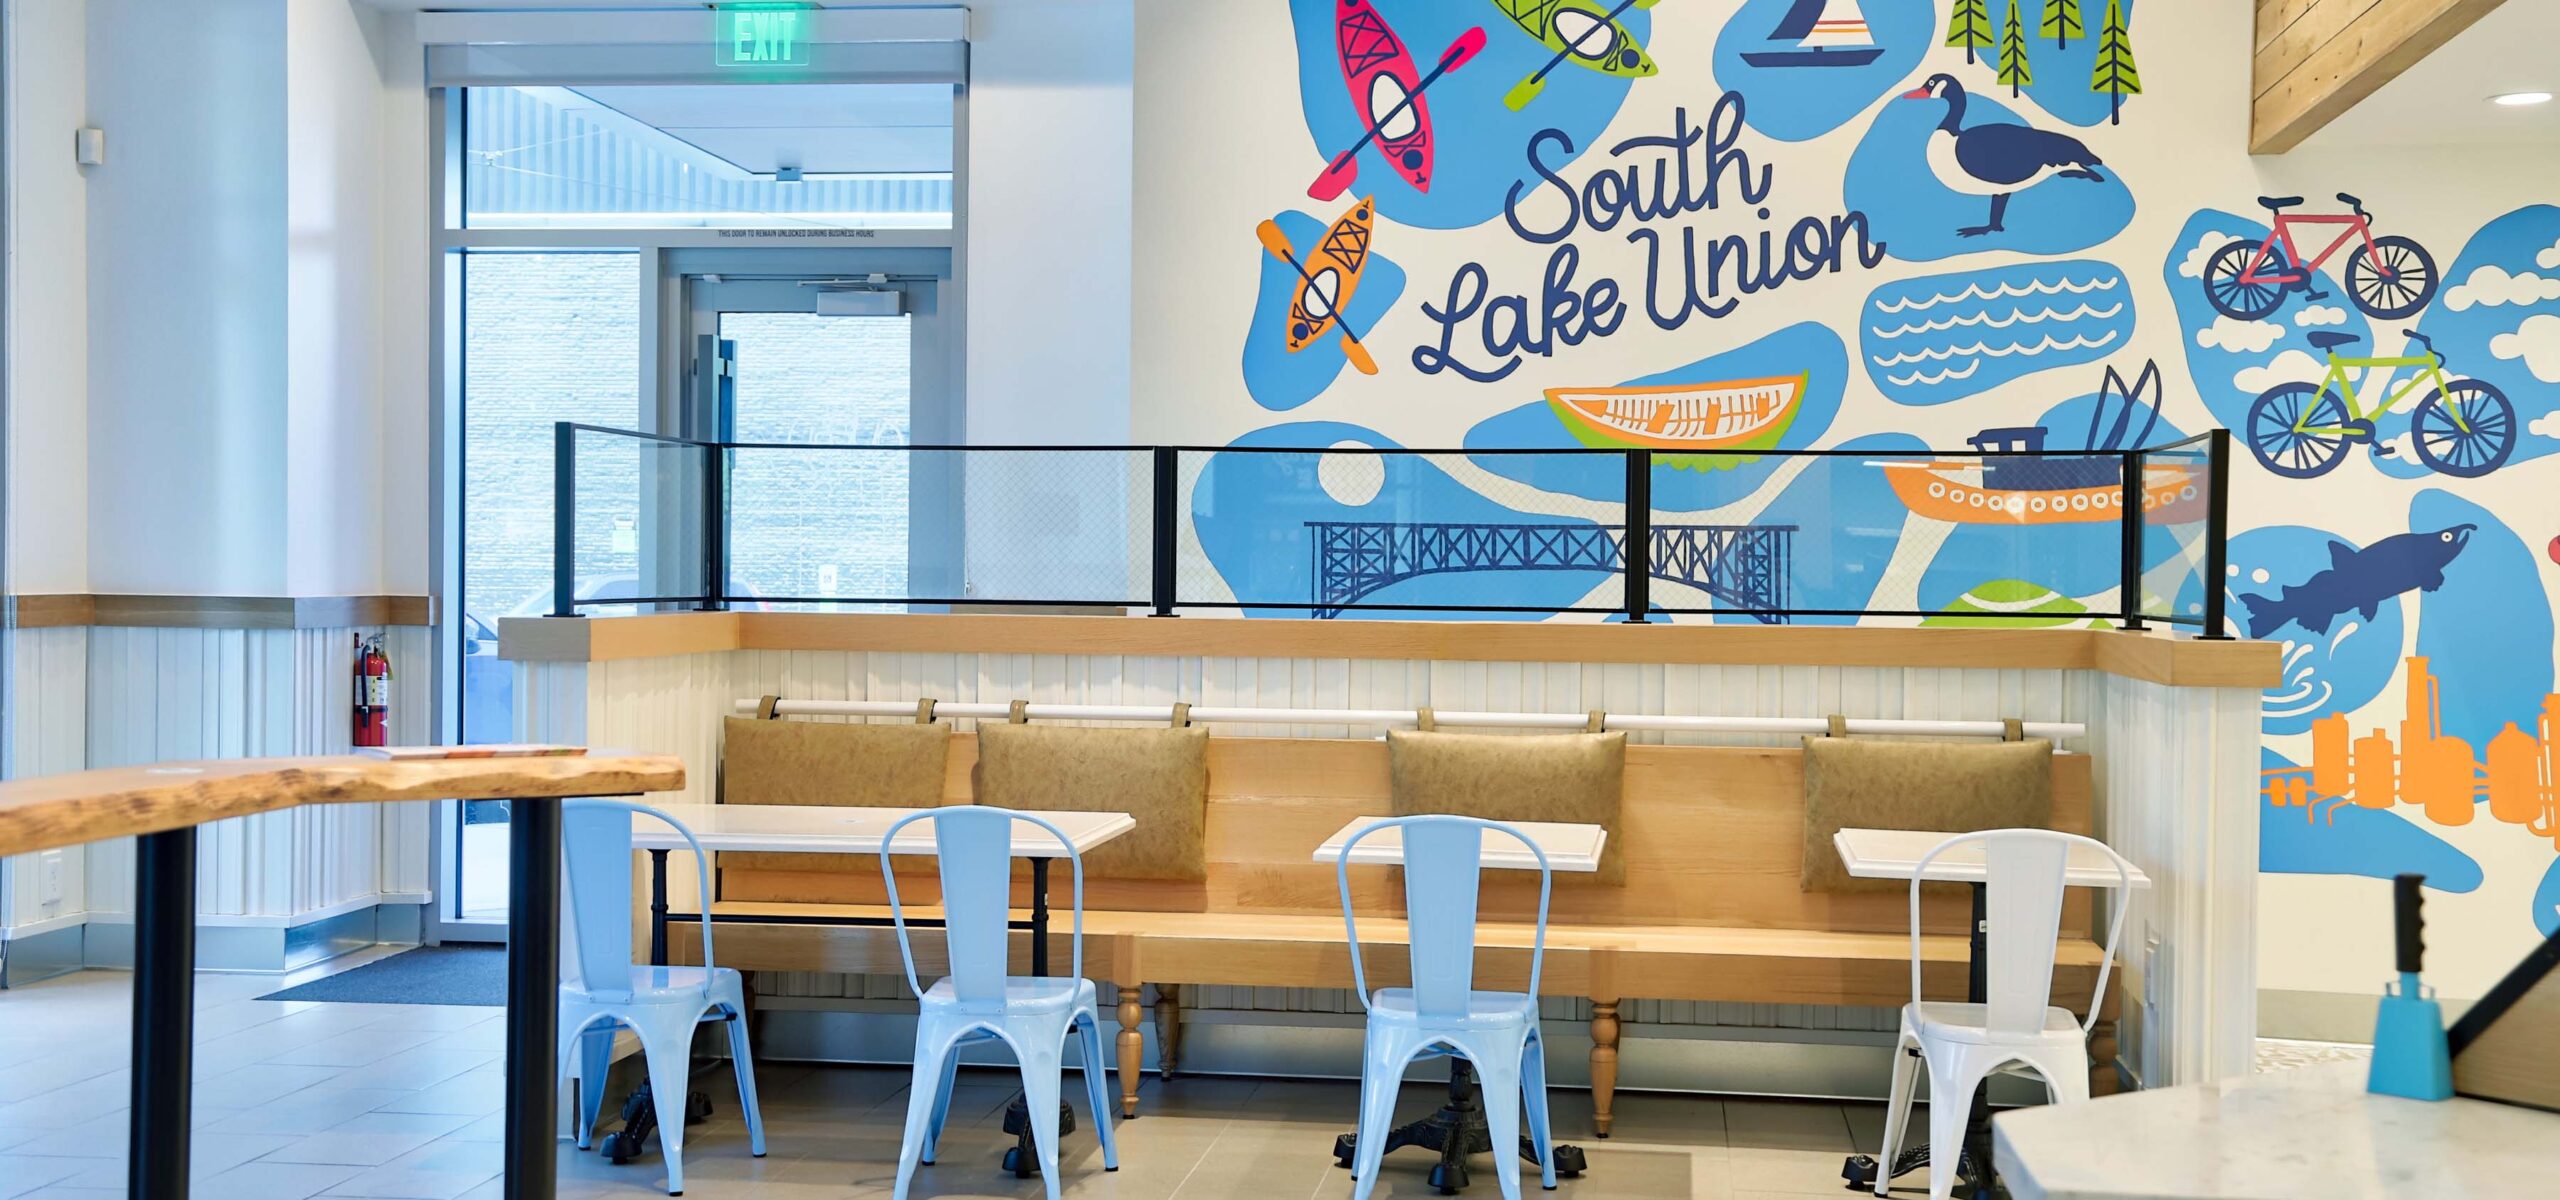 Inside a sandwich shop with a bright blue mural on the wall.